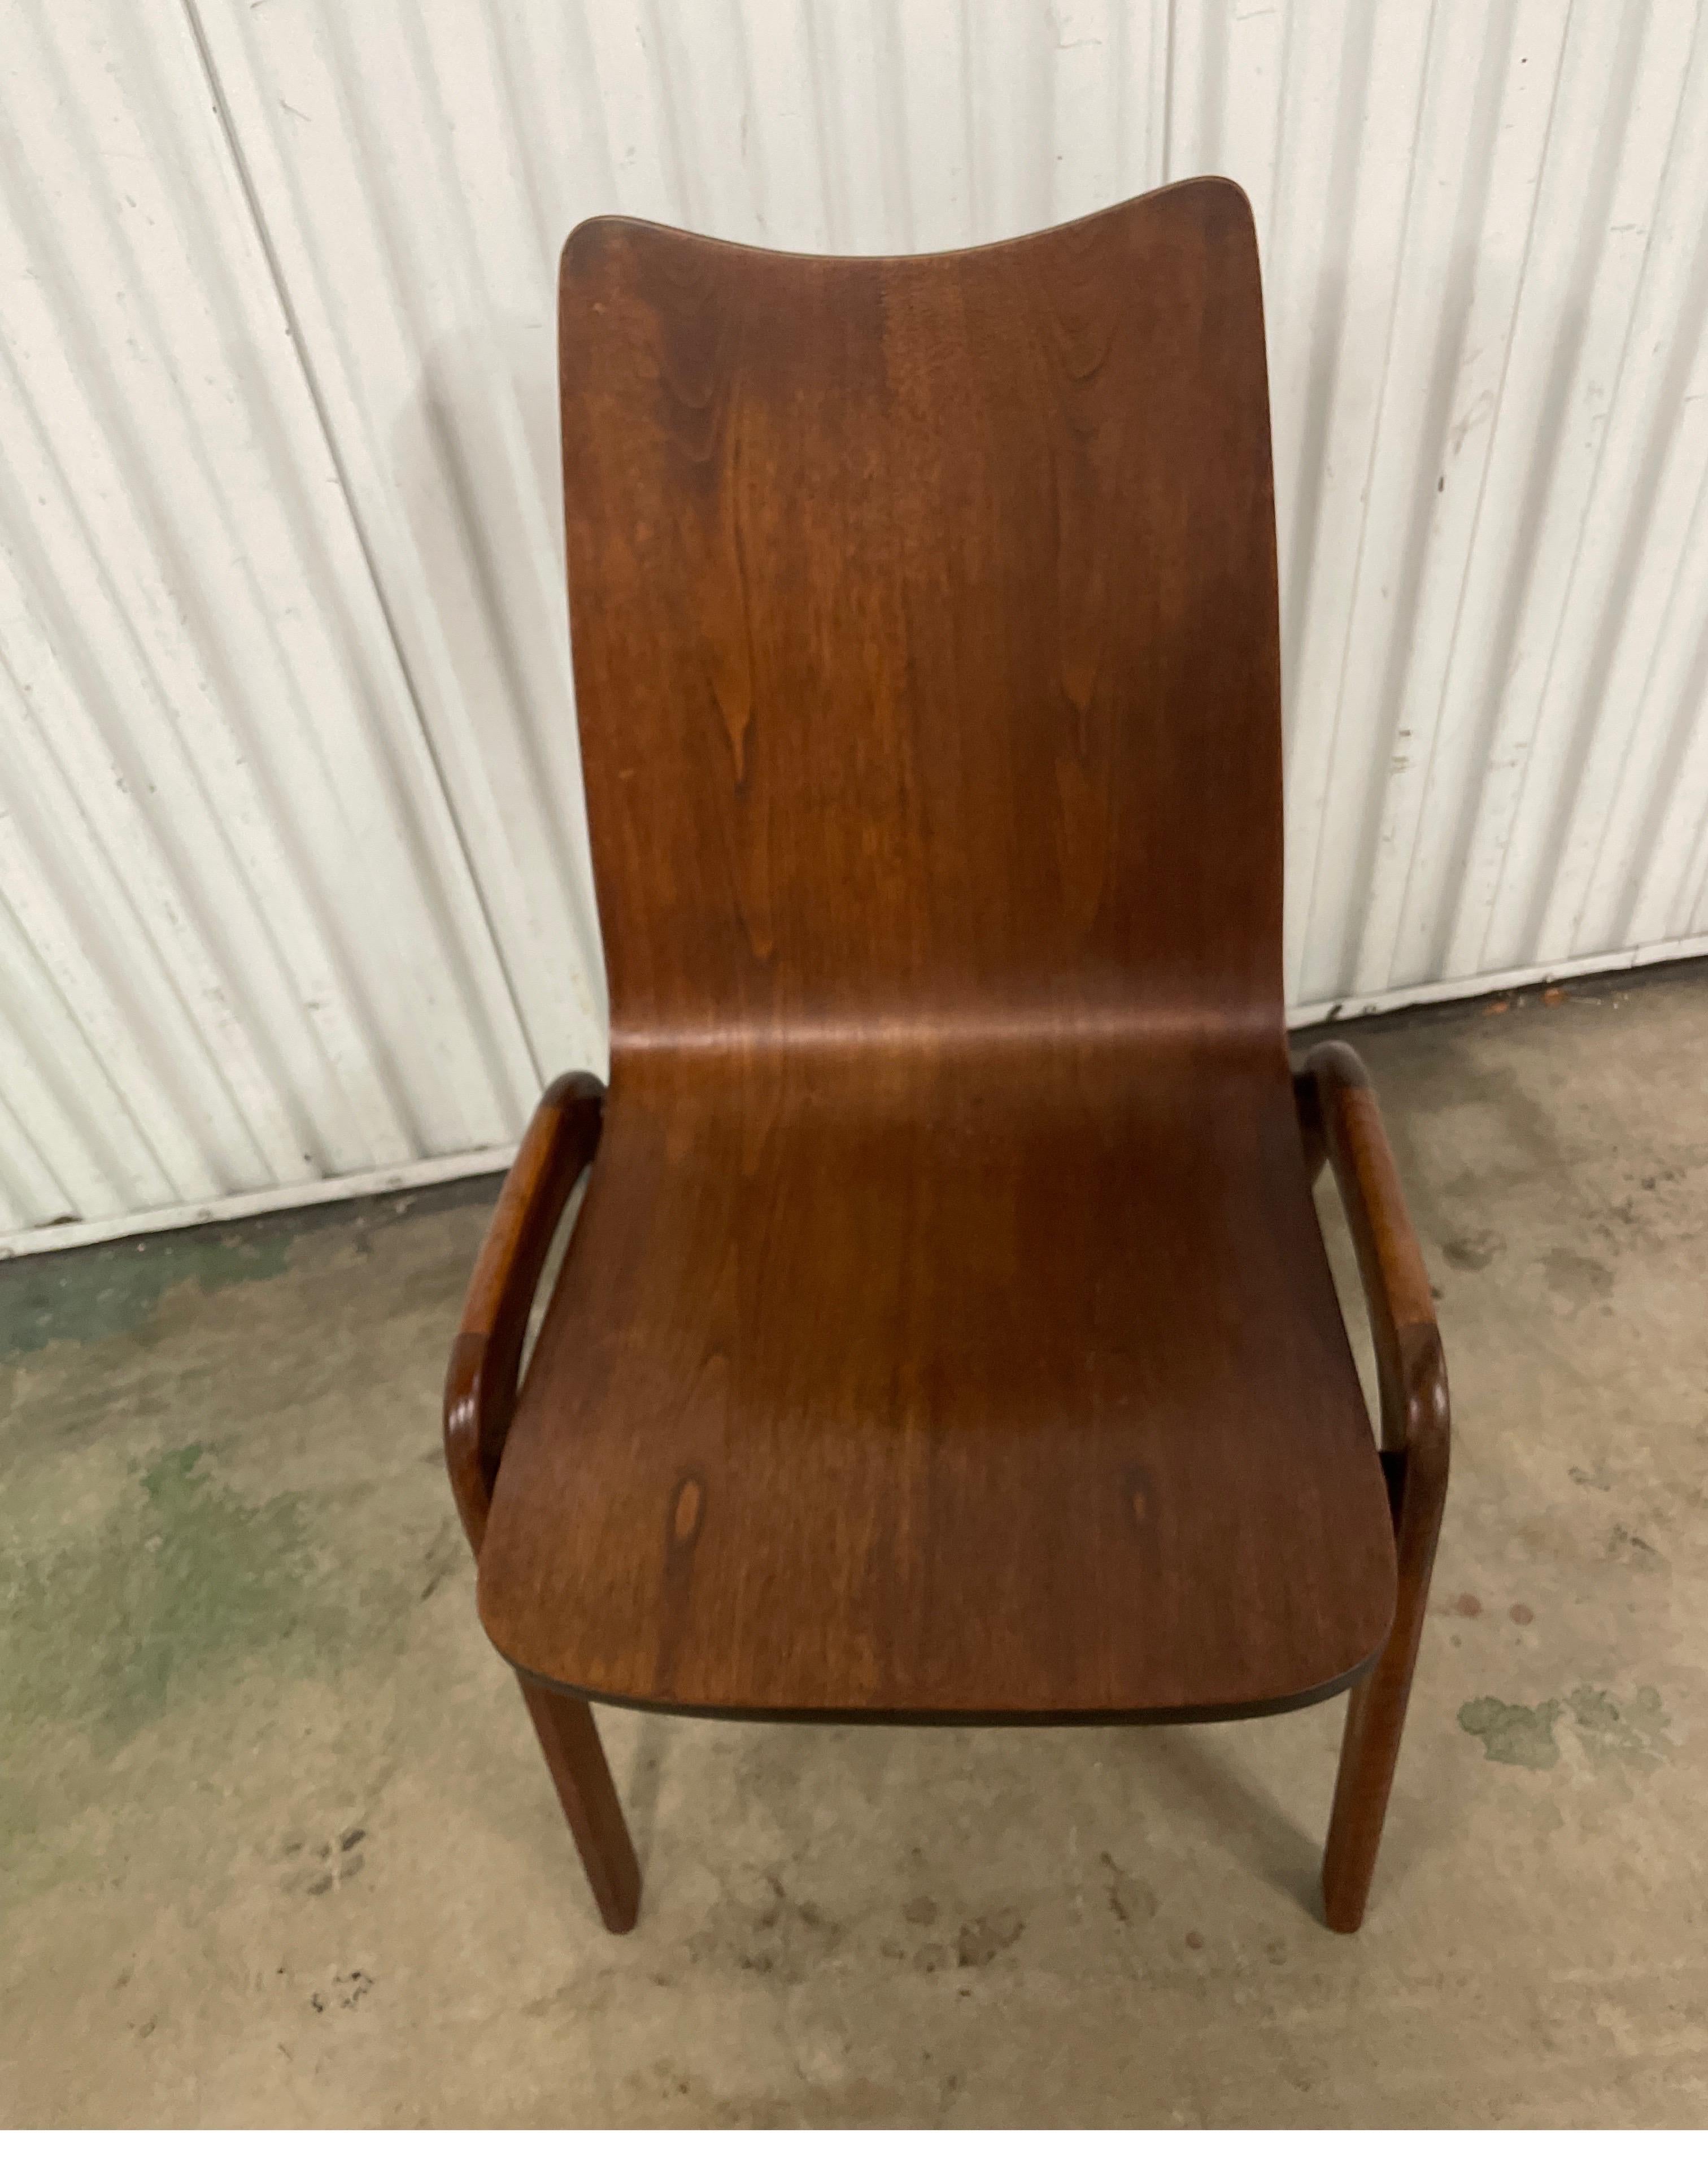 Mid Century Modern Danish Teak side chair. This would make a perfect desk chair.